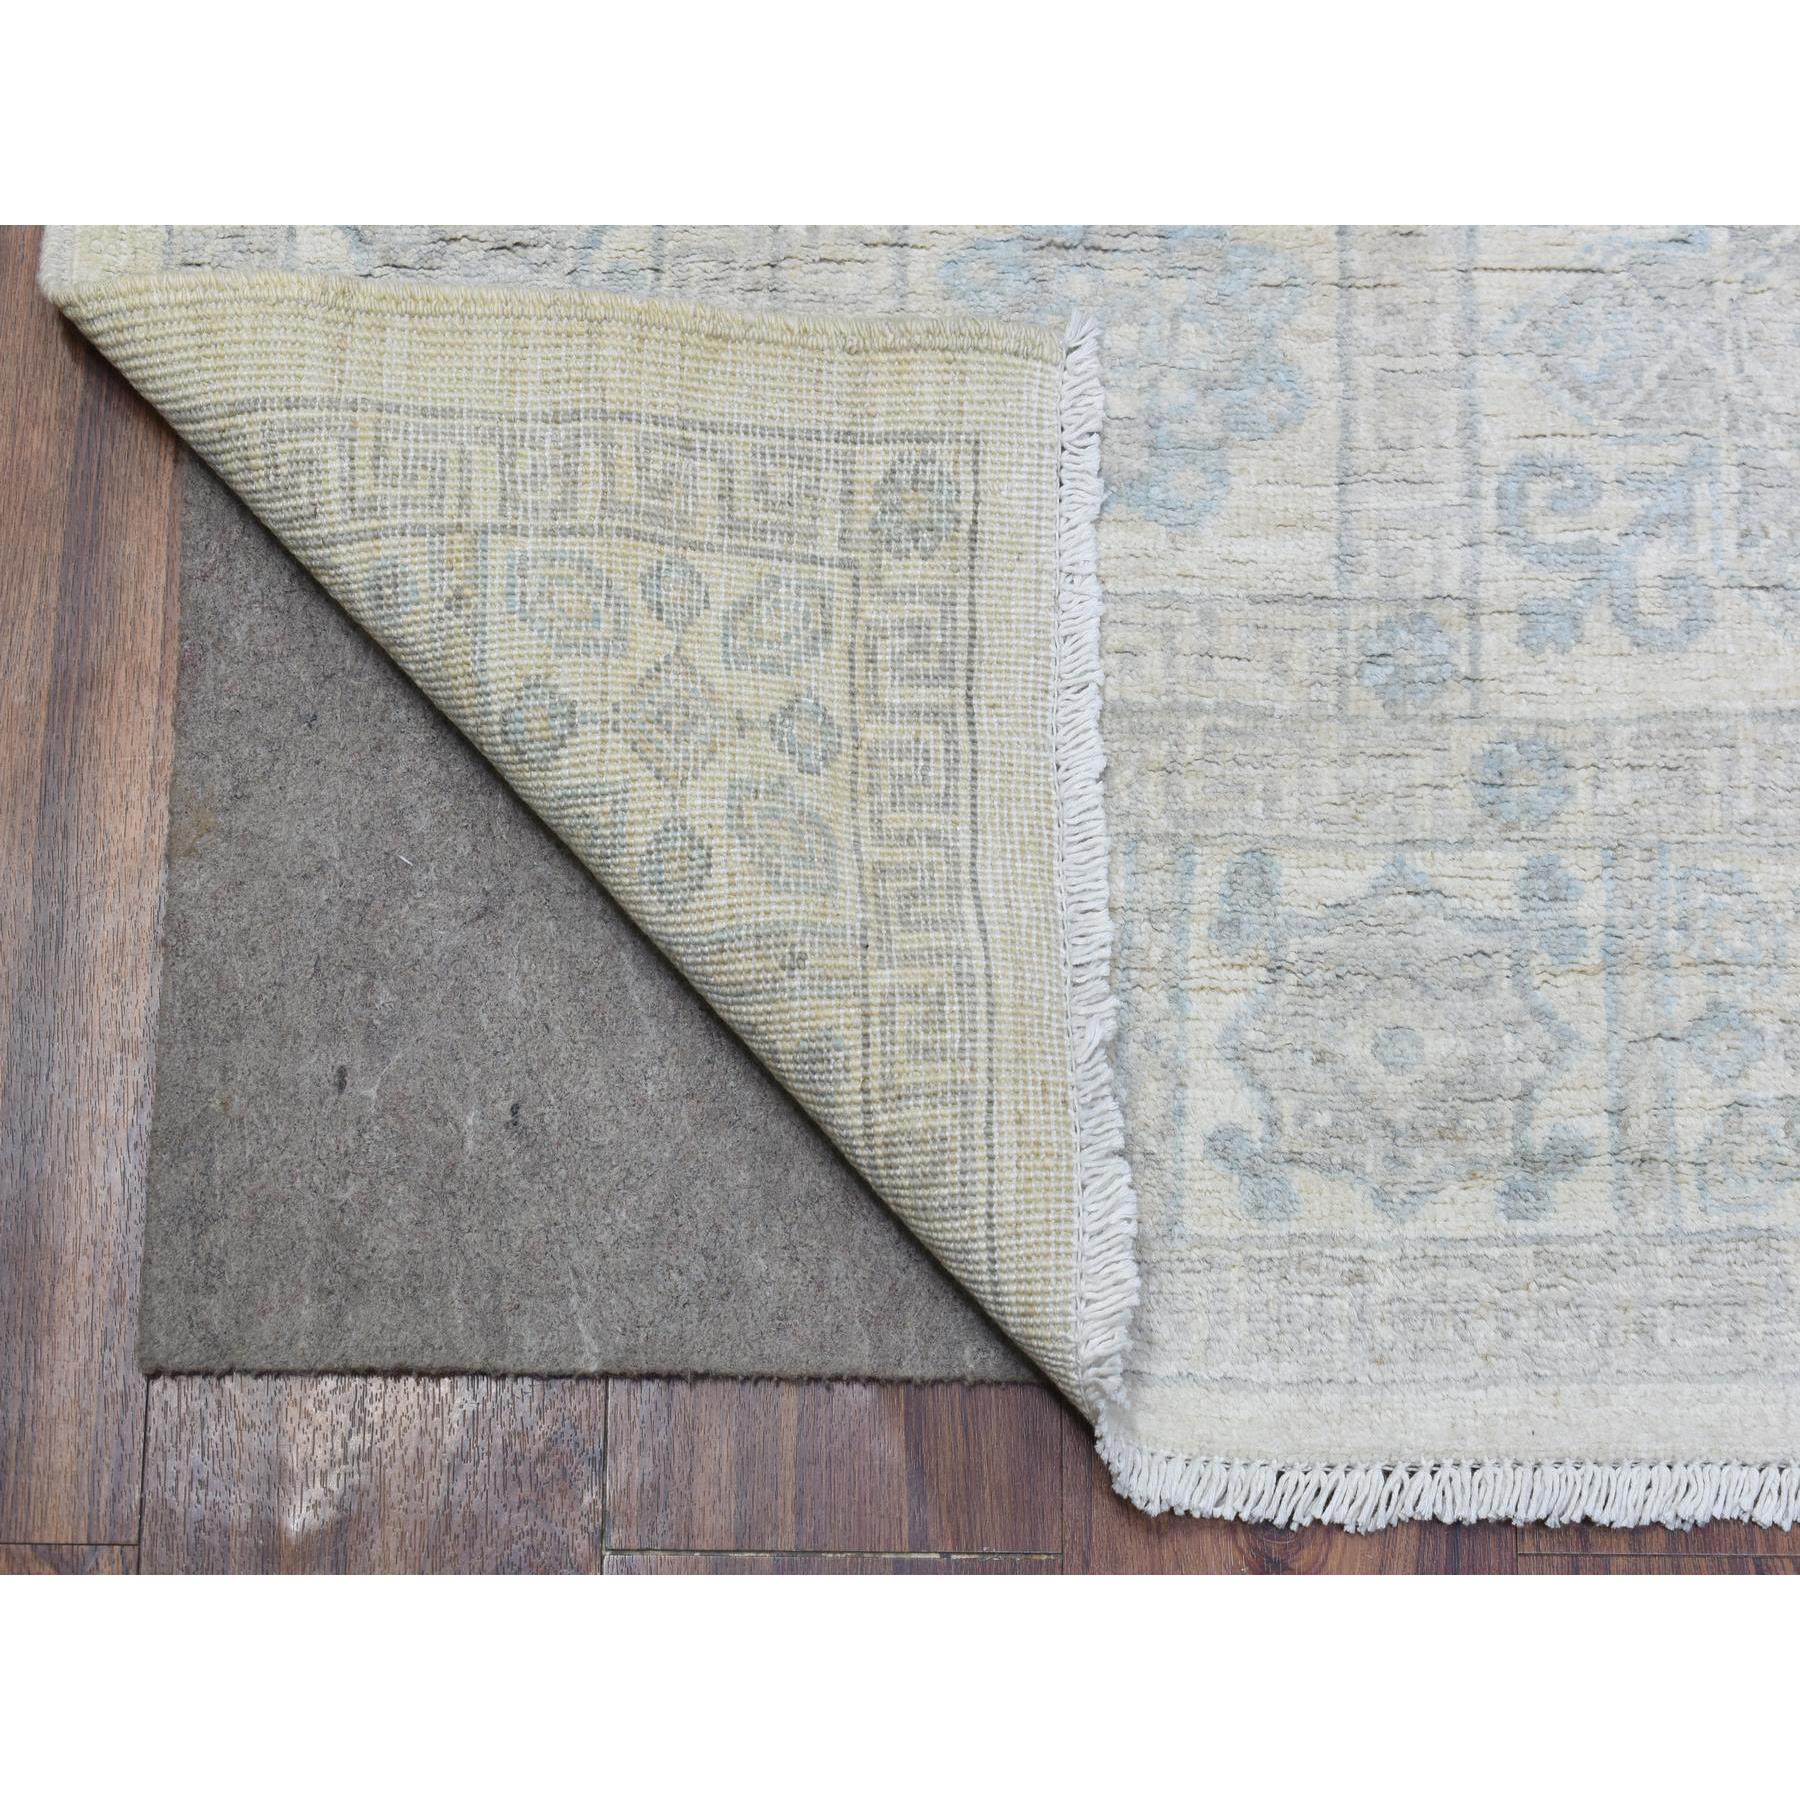 4'x11'8" Ivory, White Wash Peshawar with Geometric Design Natural Dyes, Organic Wool Hand Woven, Wide Runner Oriental Rug 